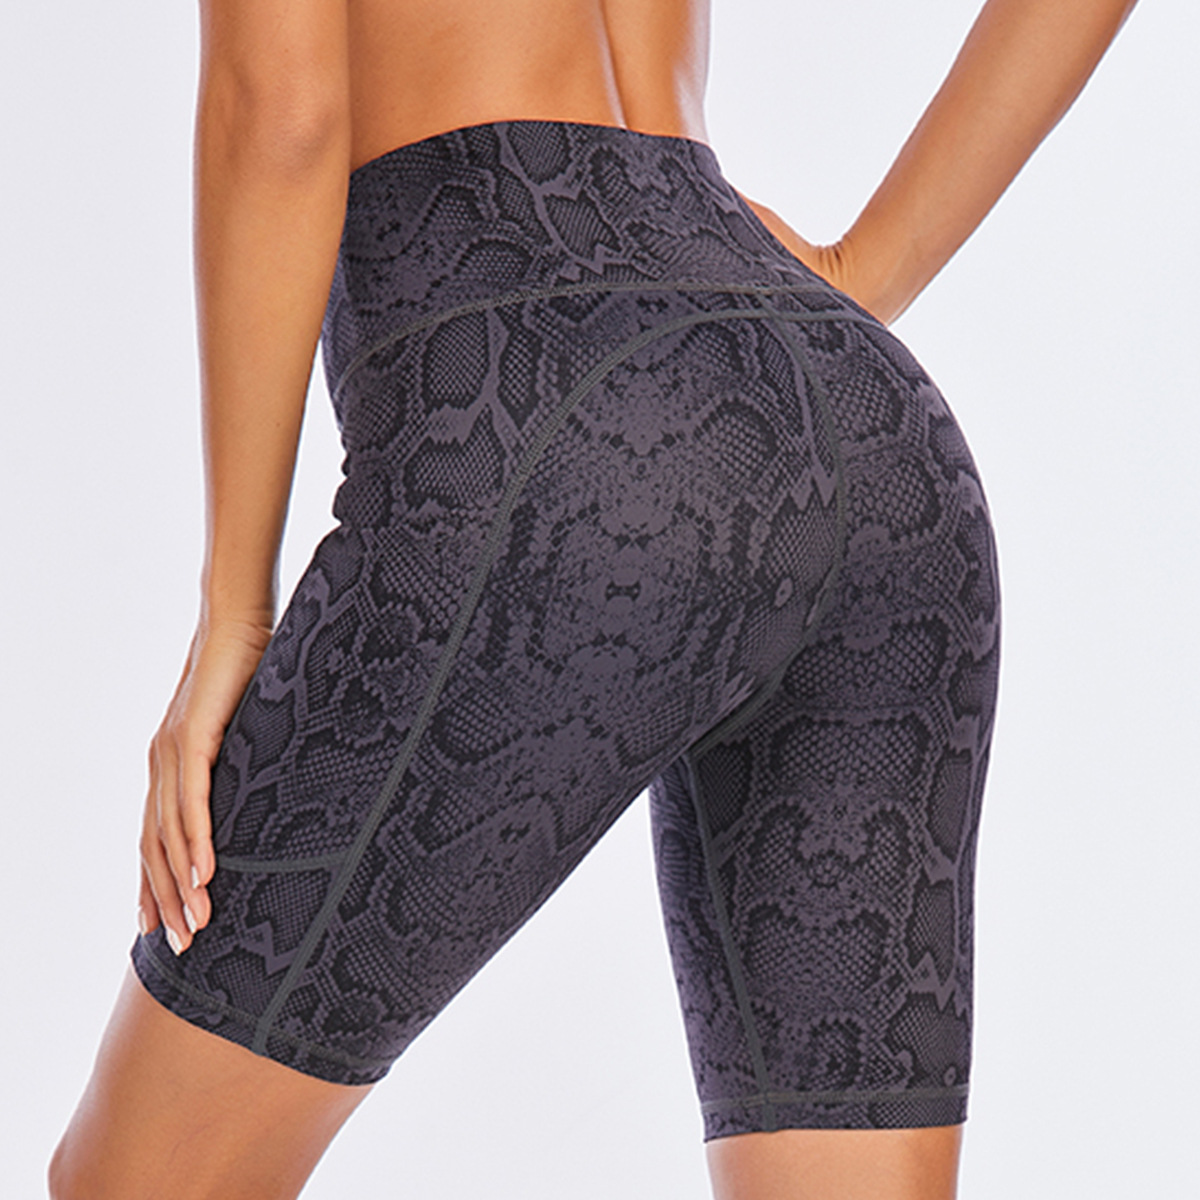 Printed Sports Yoga Shorts High-waisted Abdomen Gray Snake Print Fitness Five-point Pants